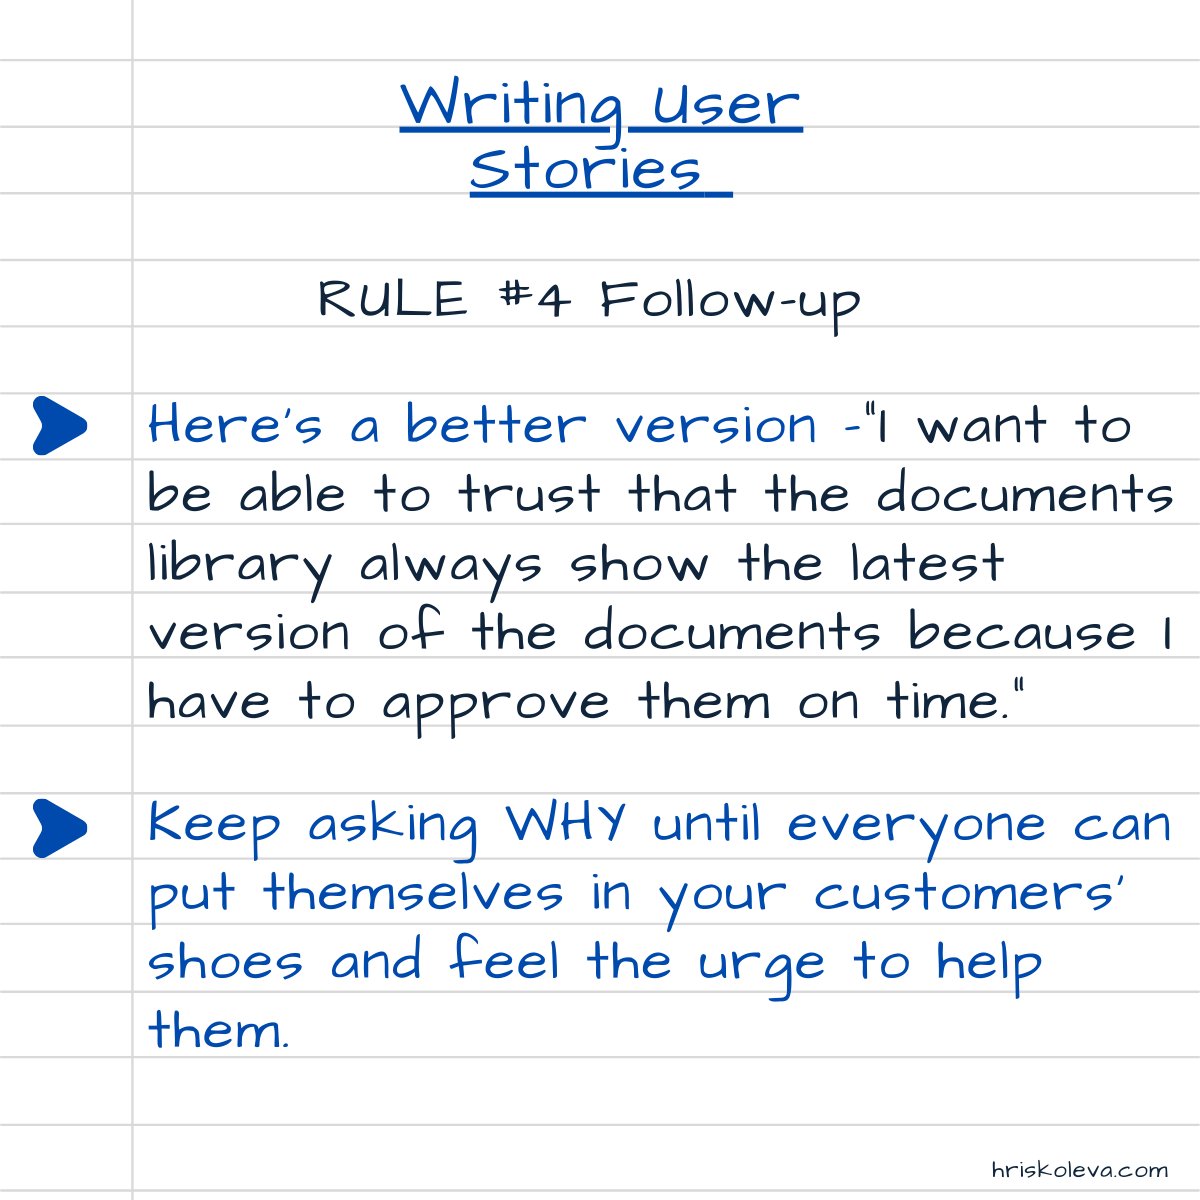 #userstories #productmanagement #qualityculture